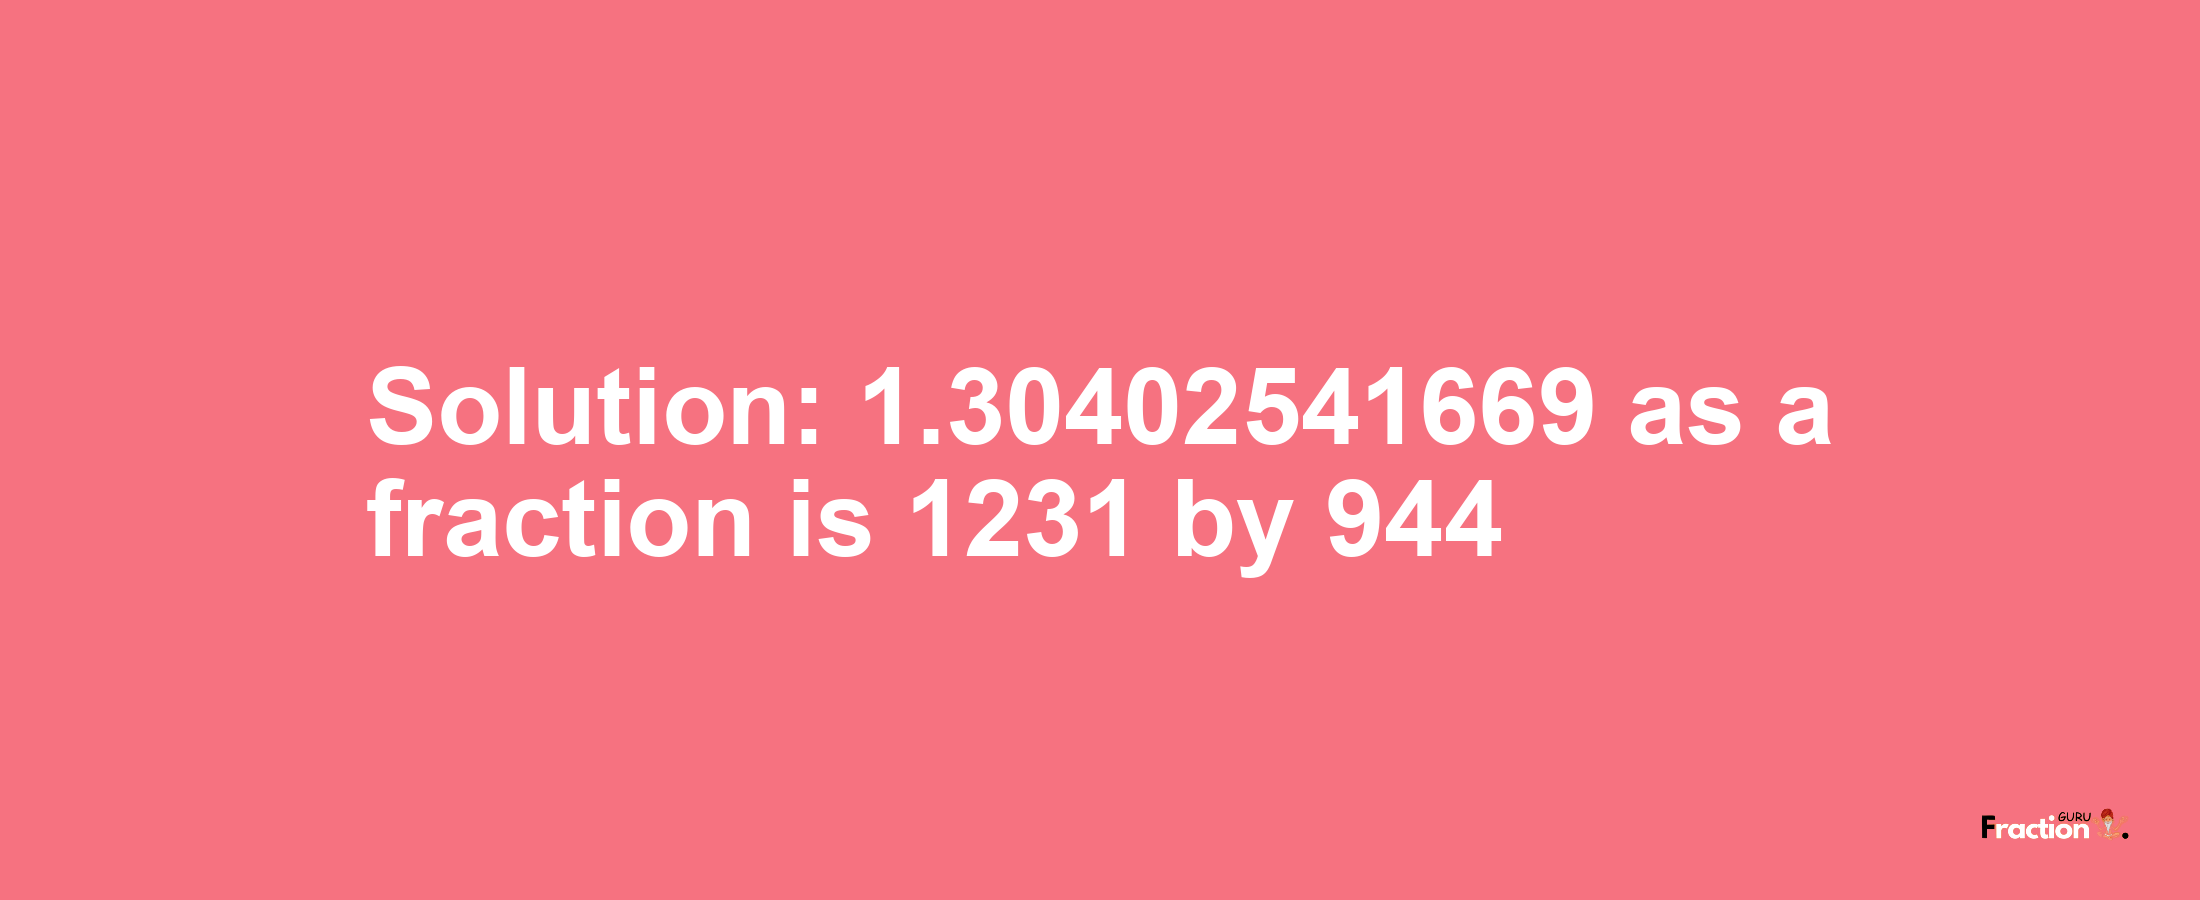 Solution:1.30402541669 as a fraction is 1231/944